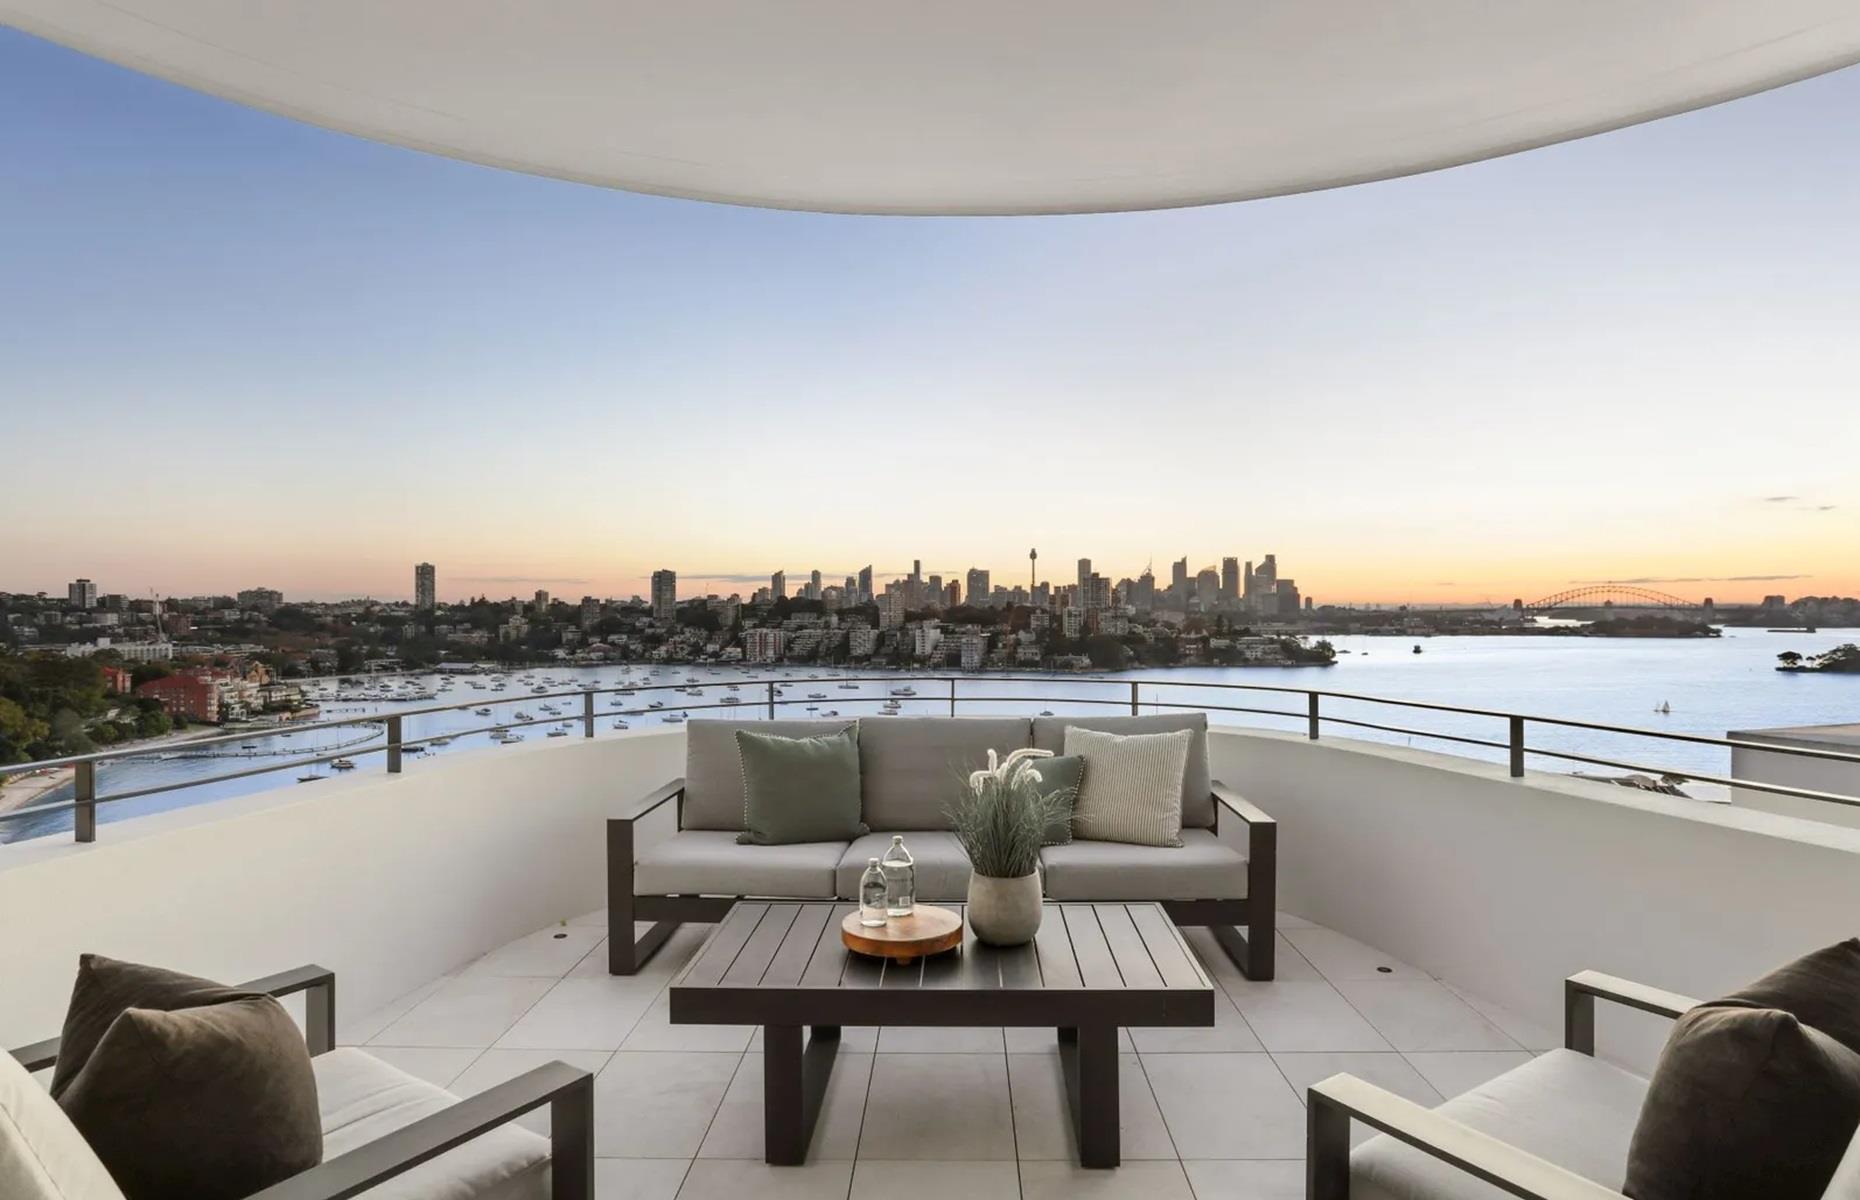 <p>This has got to be one of the best balcony views in the world! Lucky residents of 23 Wolseley Road also gain access to a secure garage, an internal laundry service, zoned ducted air-conditioning, and smart home automation. Penthouse #6 is <a href="https://www.sothebysrealty.com/eng/sales/detail/180-l-2507-kllvrp/23-wolseley-road-point-piper-sydney-sw">on the market</a> right now for an undisclosed sum. However, another penthouse inside the building <a href="https://www.news.com.au/finance/real-estate/sydney-prestige-property-get-set-for-the-postschoolholiday-trickle-to-sell-before-christmas/news-story/4c5daee9be57657c78e880655cf8089b">sold</a> in October 2022 for AU$30 million, which equates to $20.2 million, so it's likely this one is worth even more. </p>